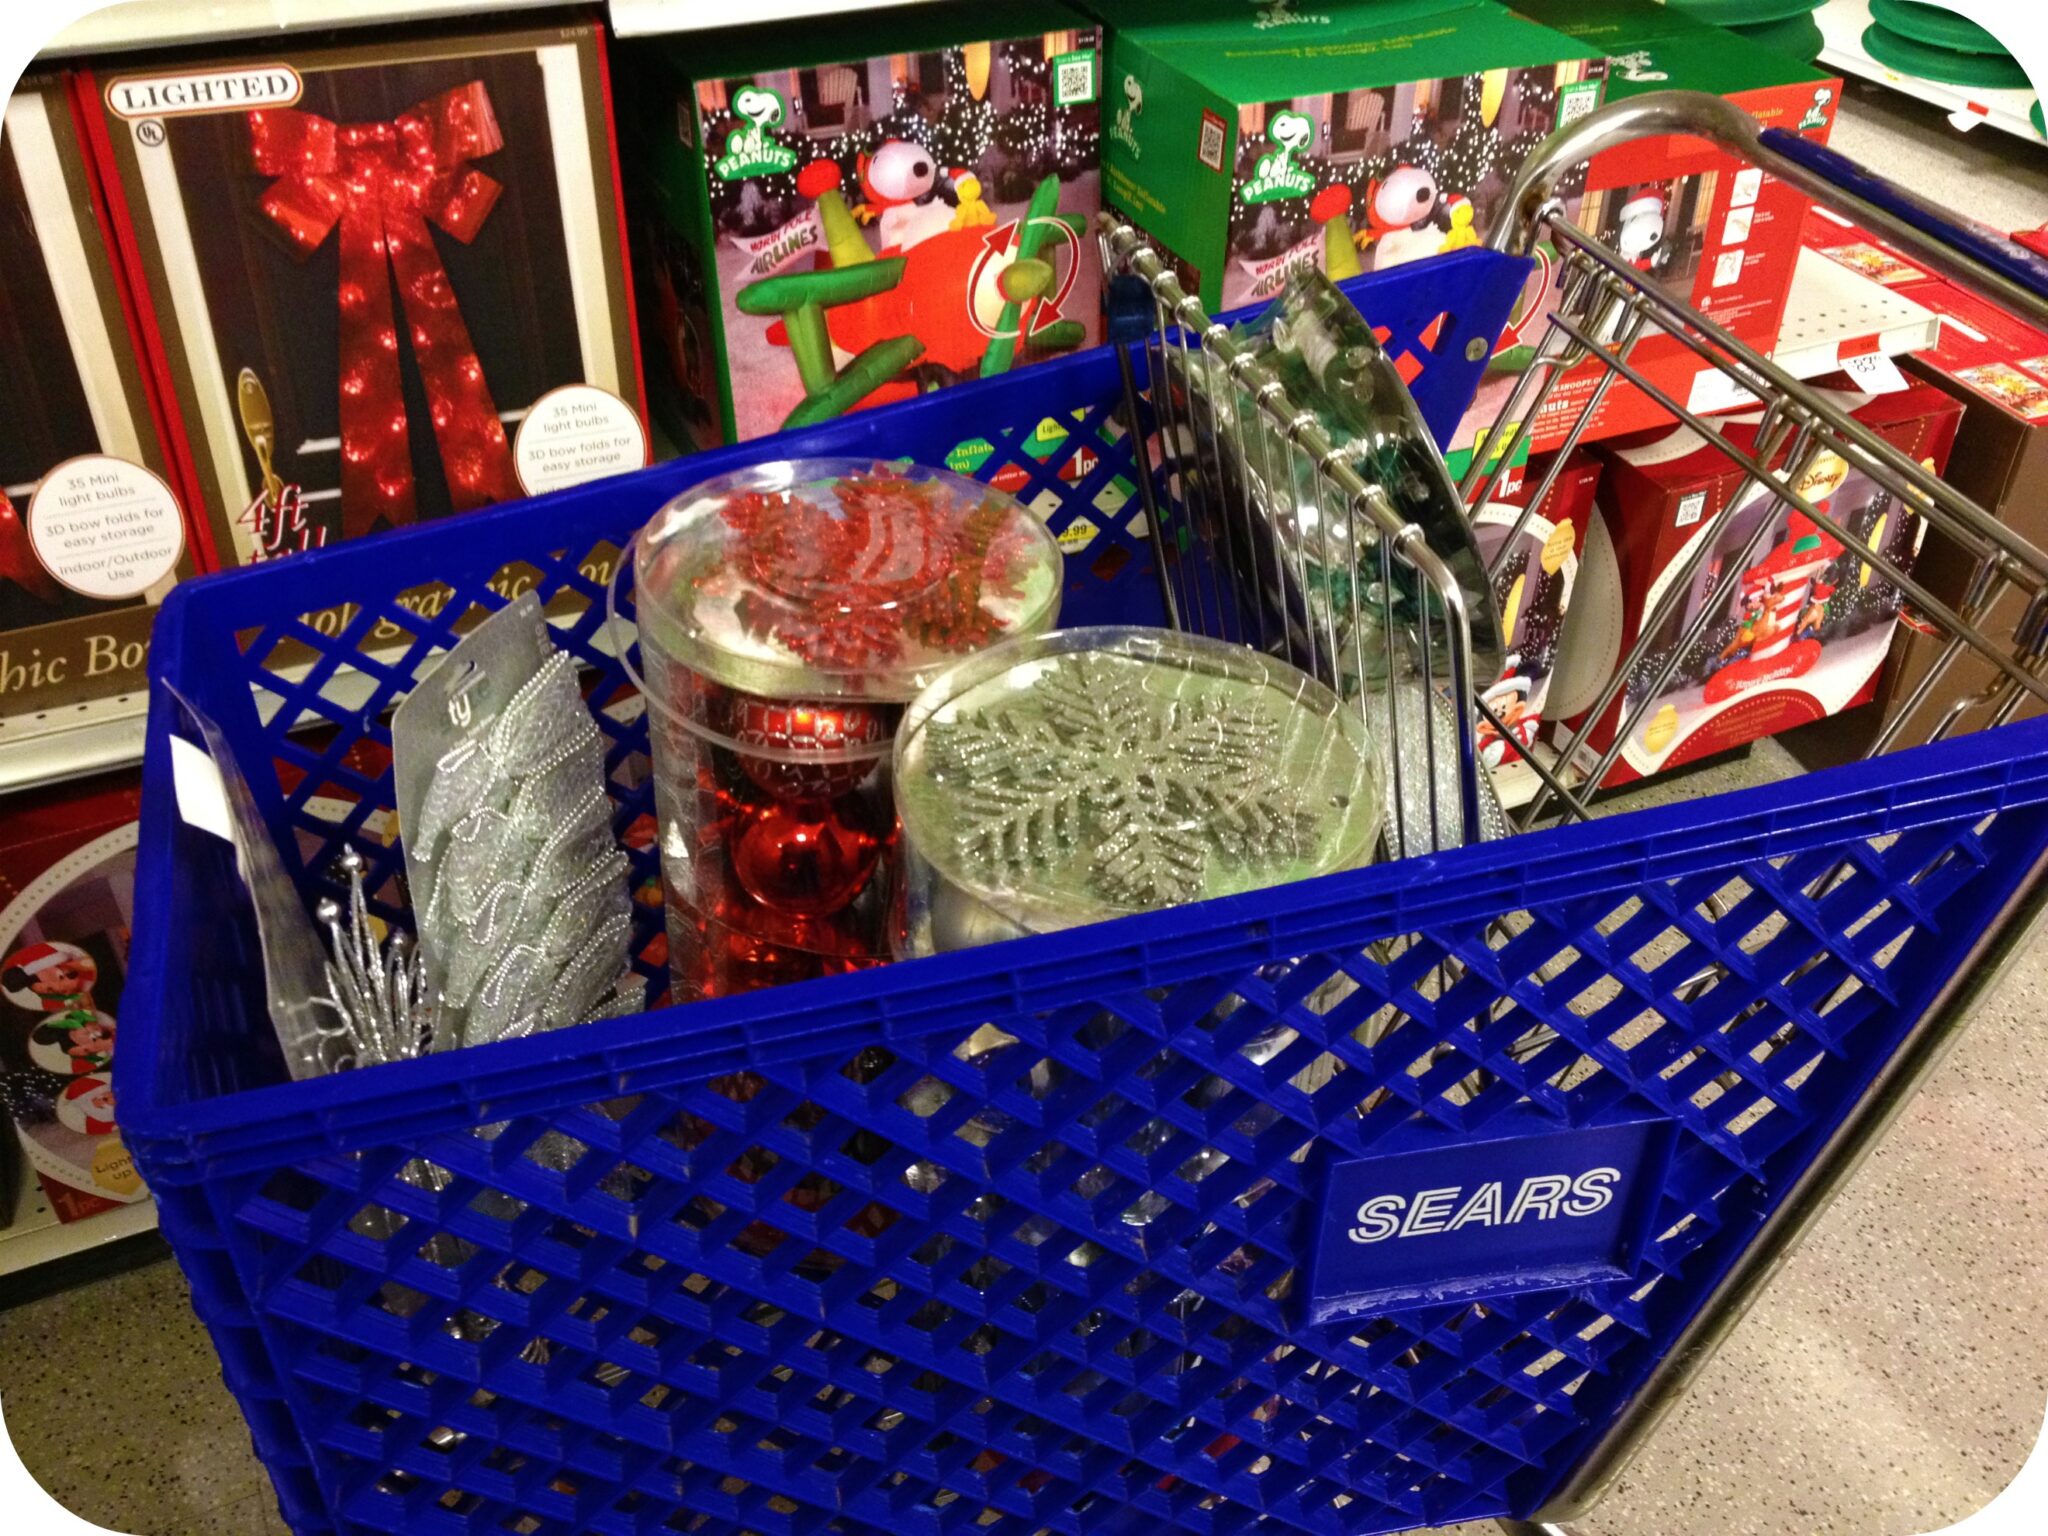 Tree Trimming: Sears Shopping Mission. #SearsRealCheers